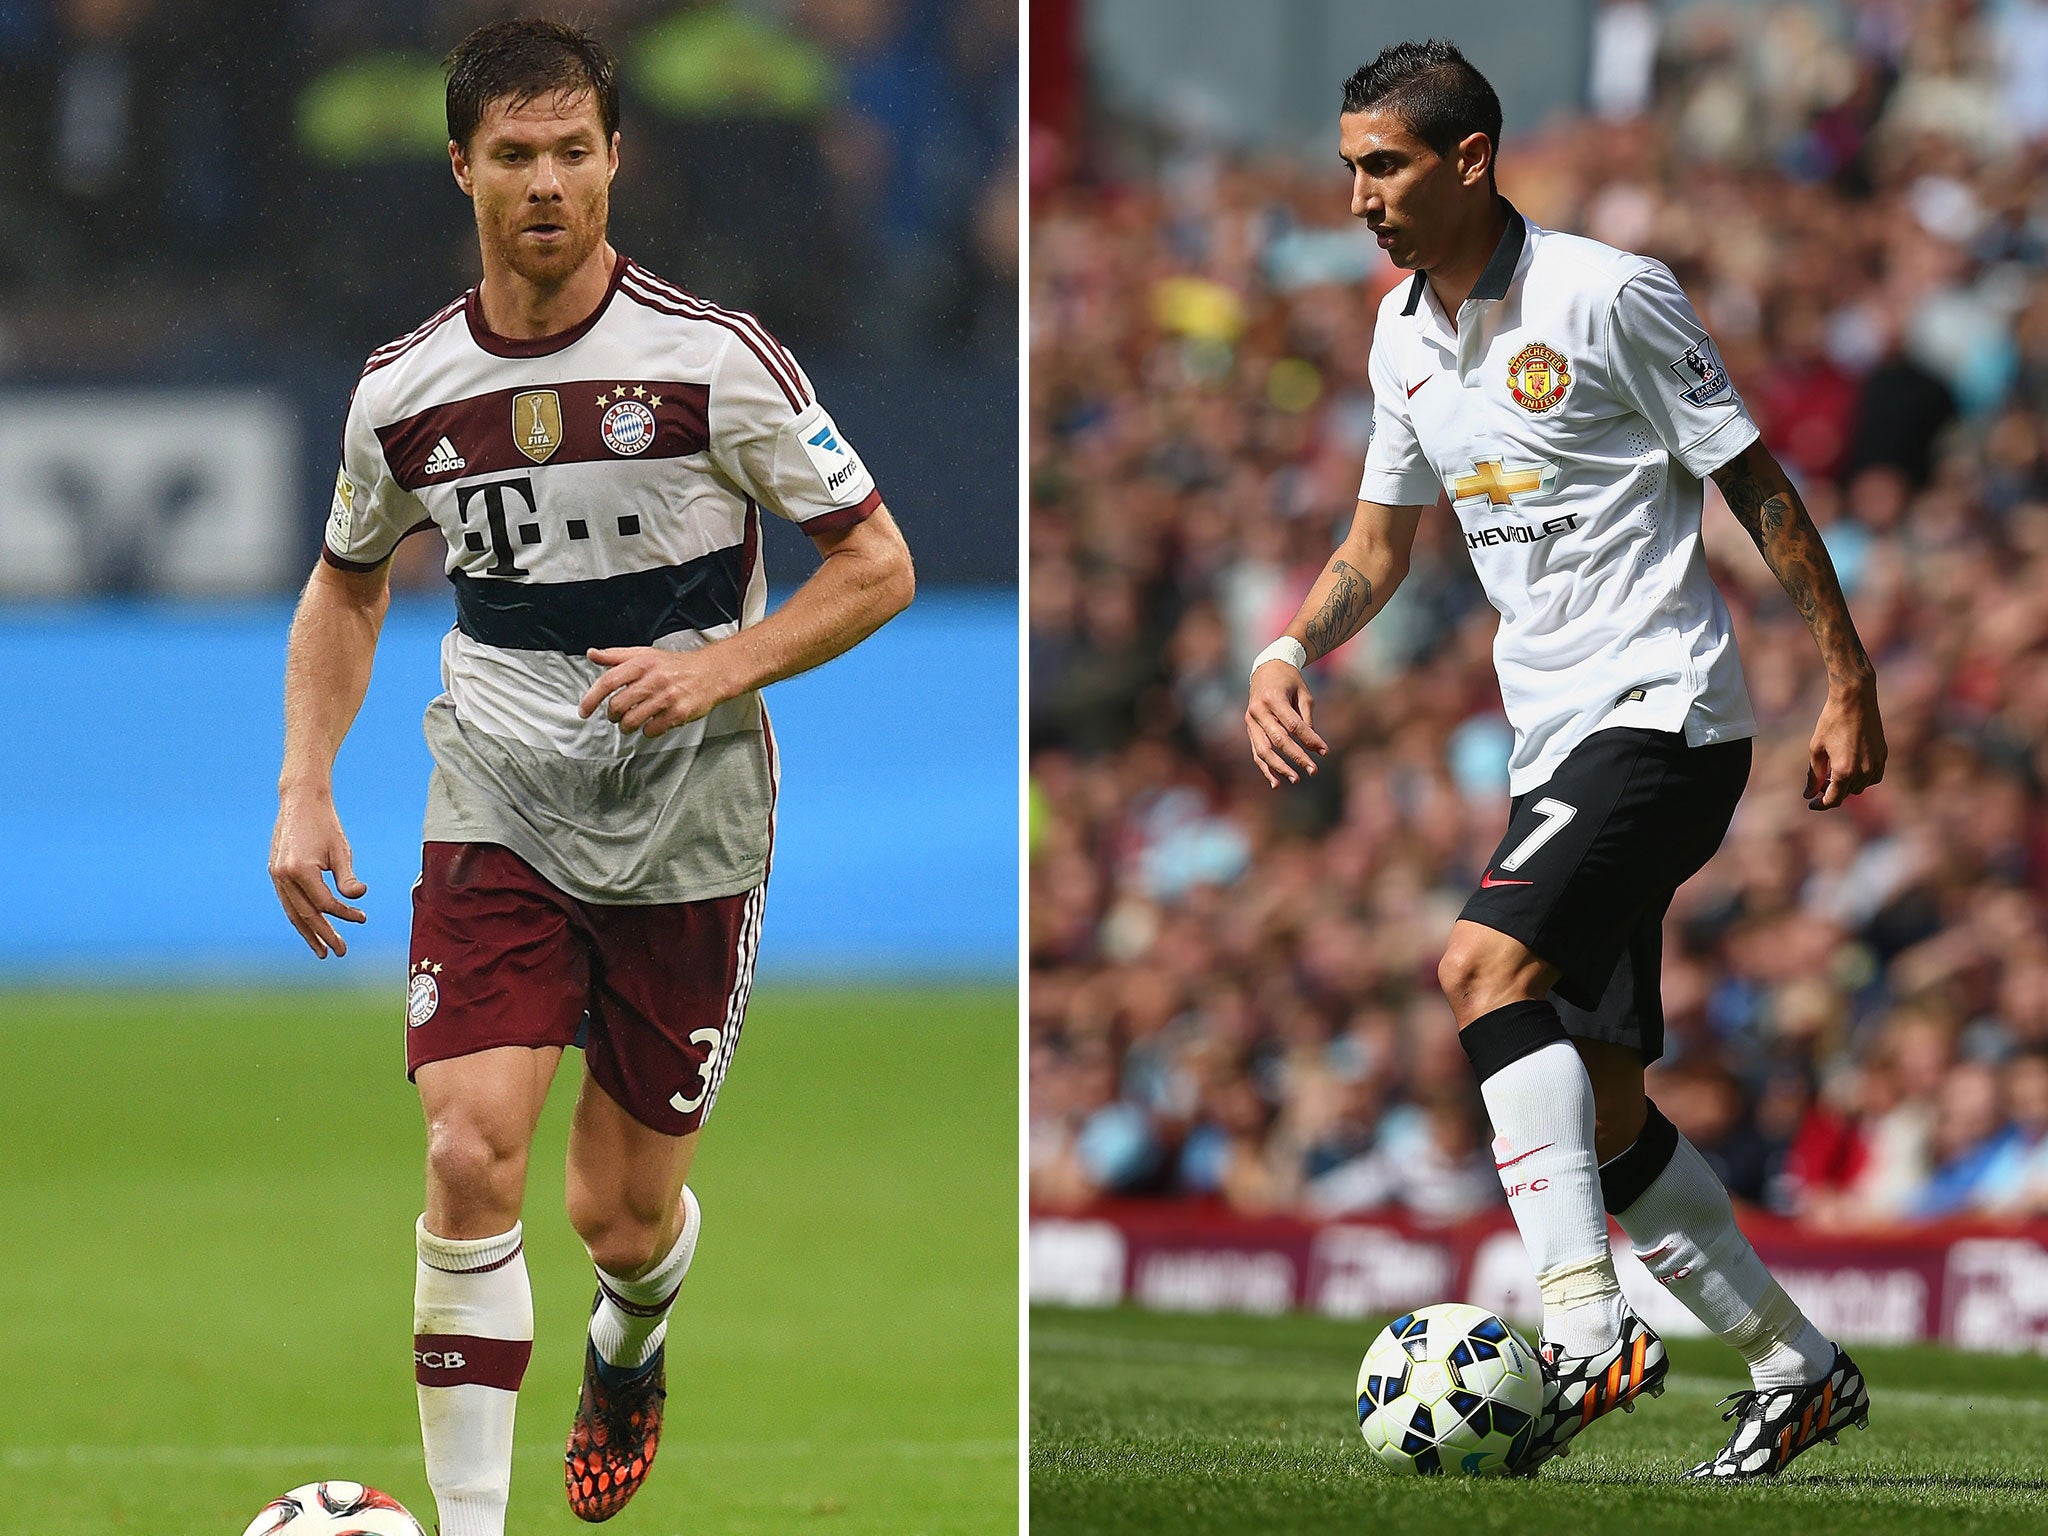 Xabi Alonso and Angel Di Maria both left Real Madrid this summer